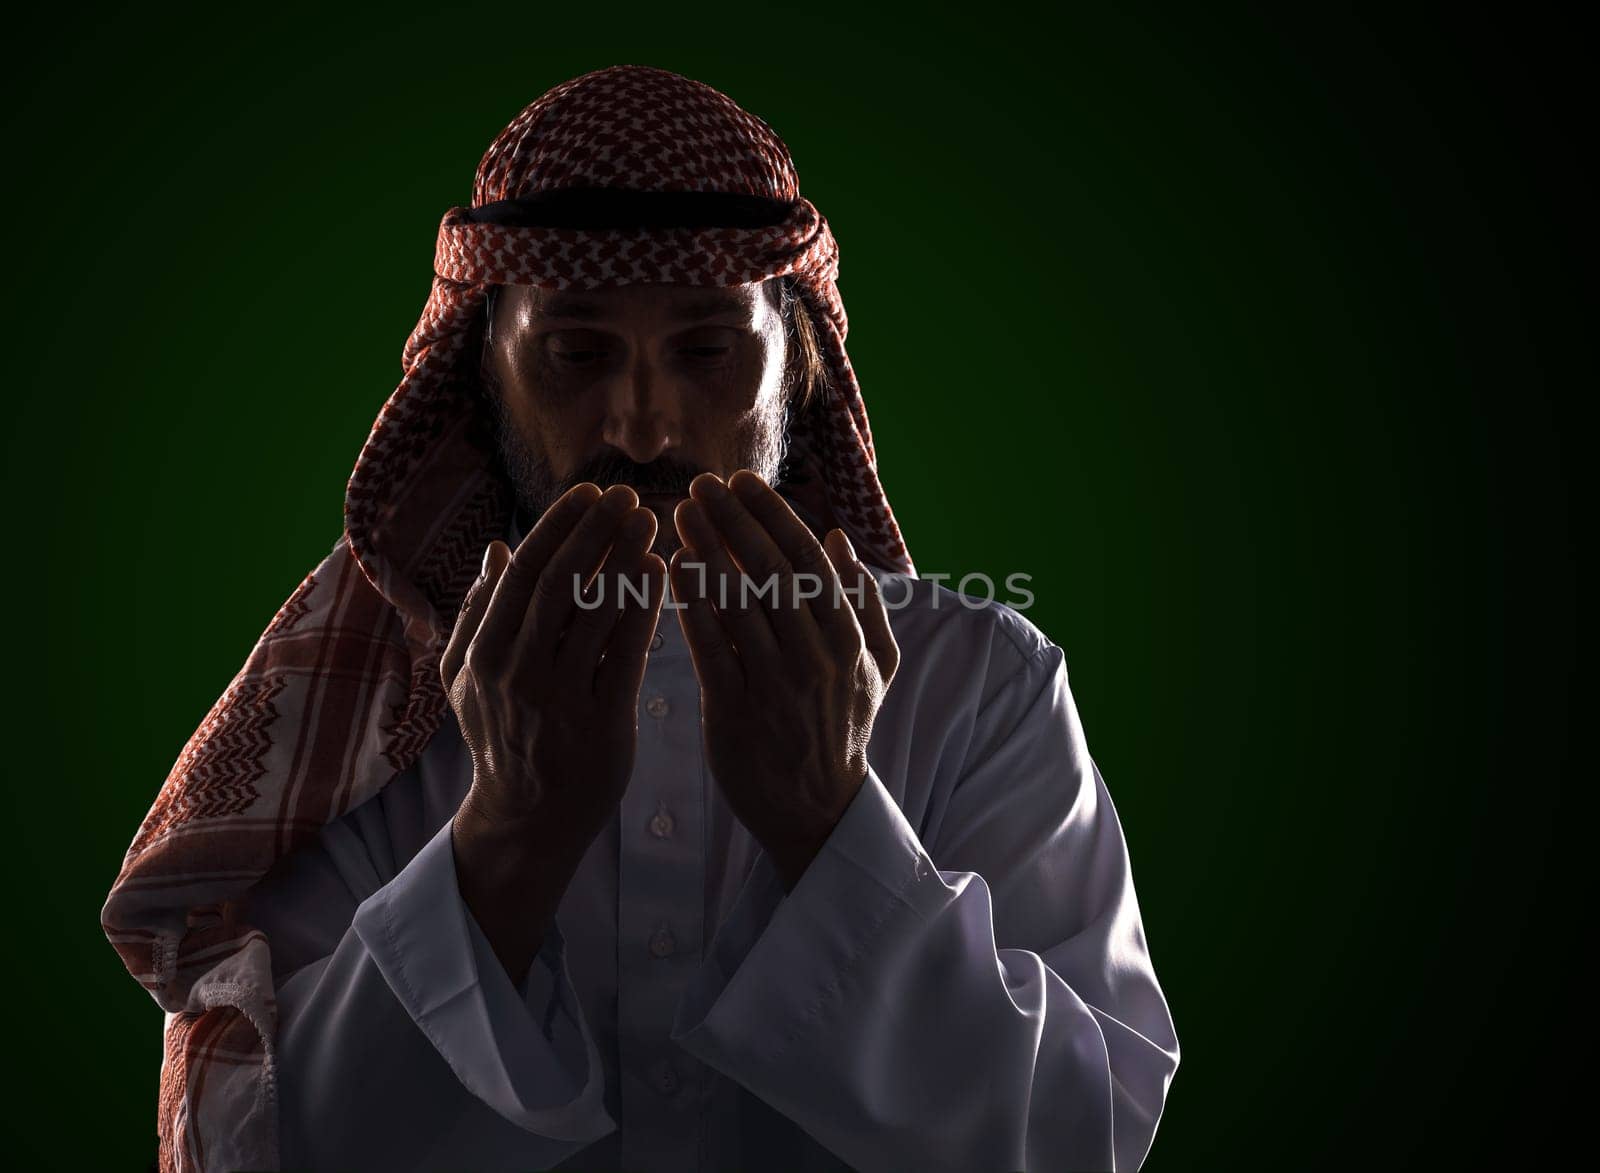 Arab man in prayer with his palms in front of his face. It conveys the devotion and spirituality inherent in Islamic culture by LipikStockMedia